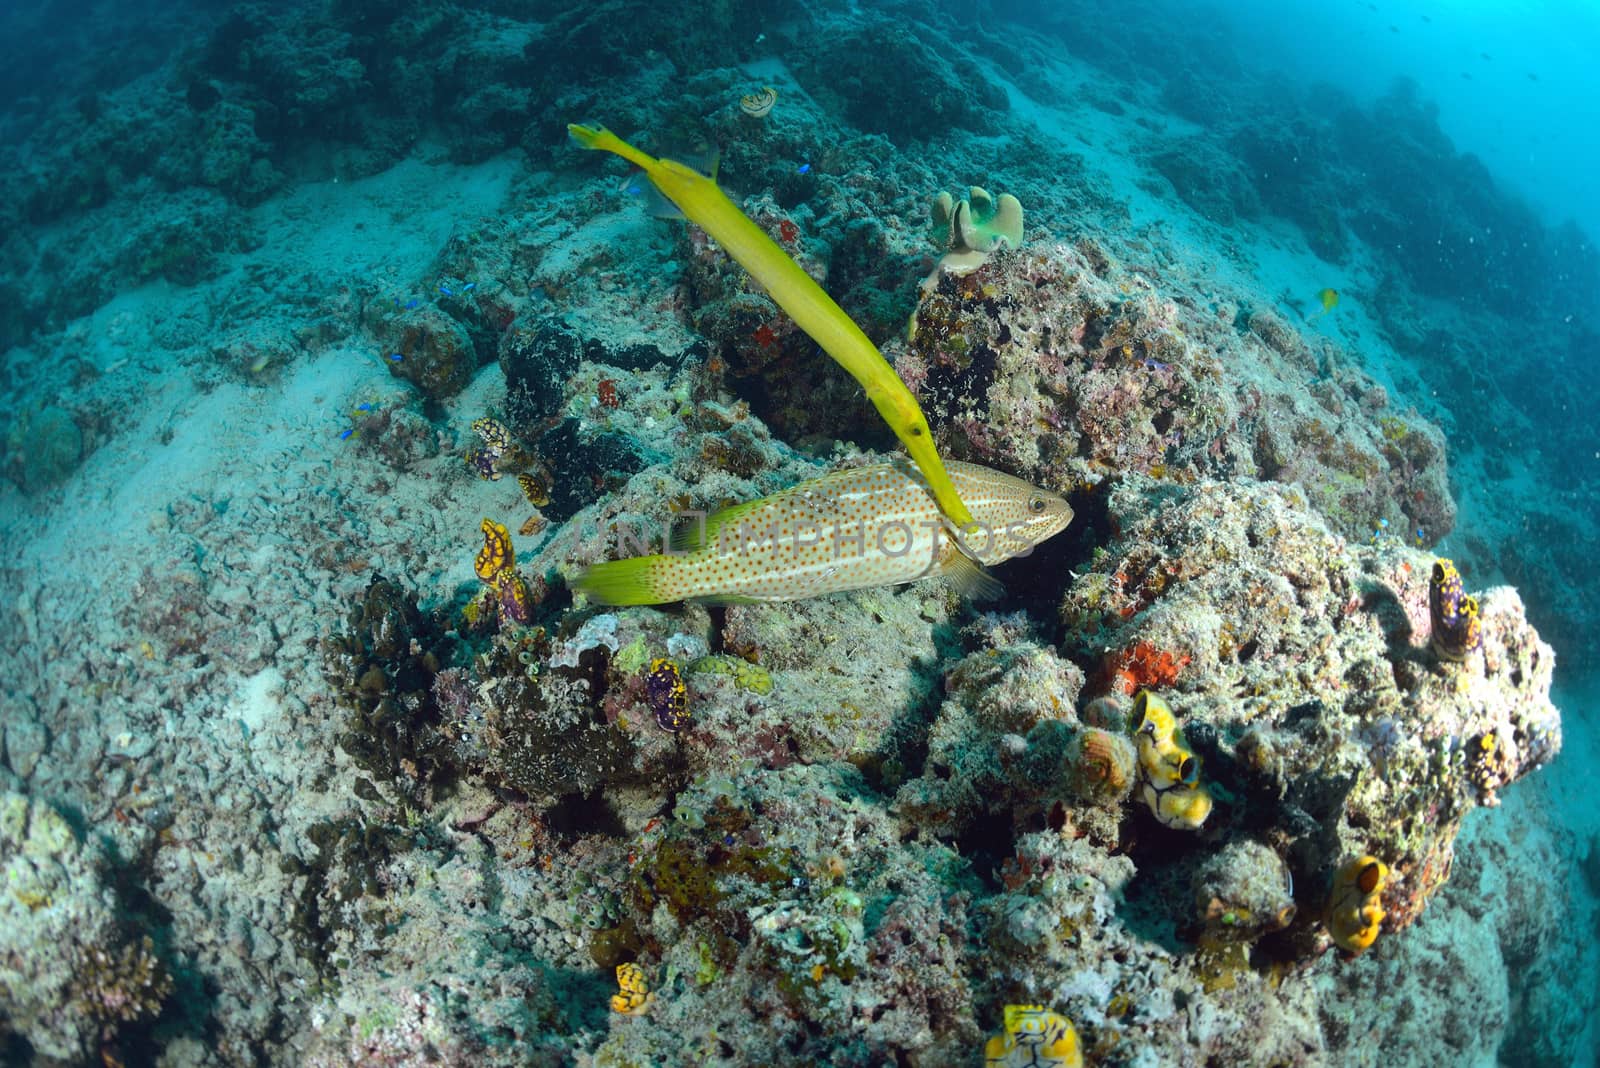 trumpetfish from the reefs of the Mabul ocean, Sipadan, Malaysia by think4photop